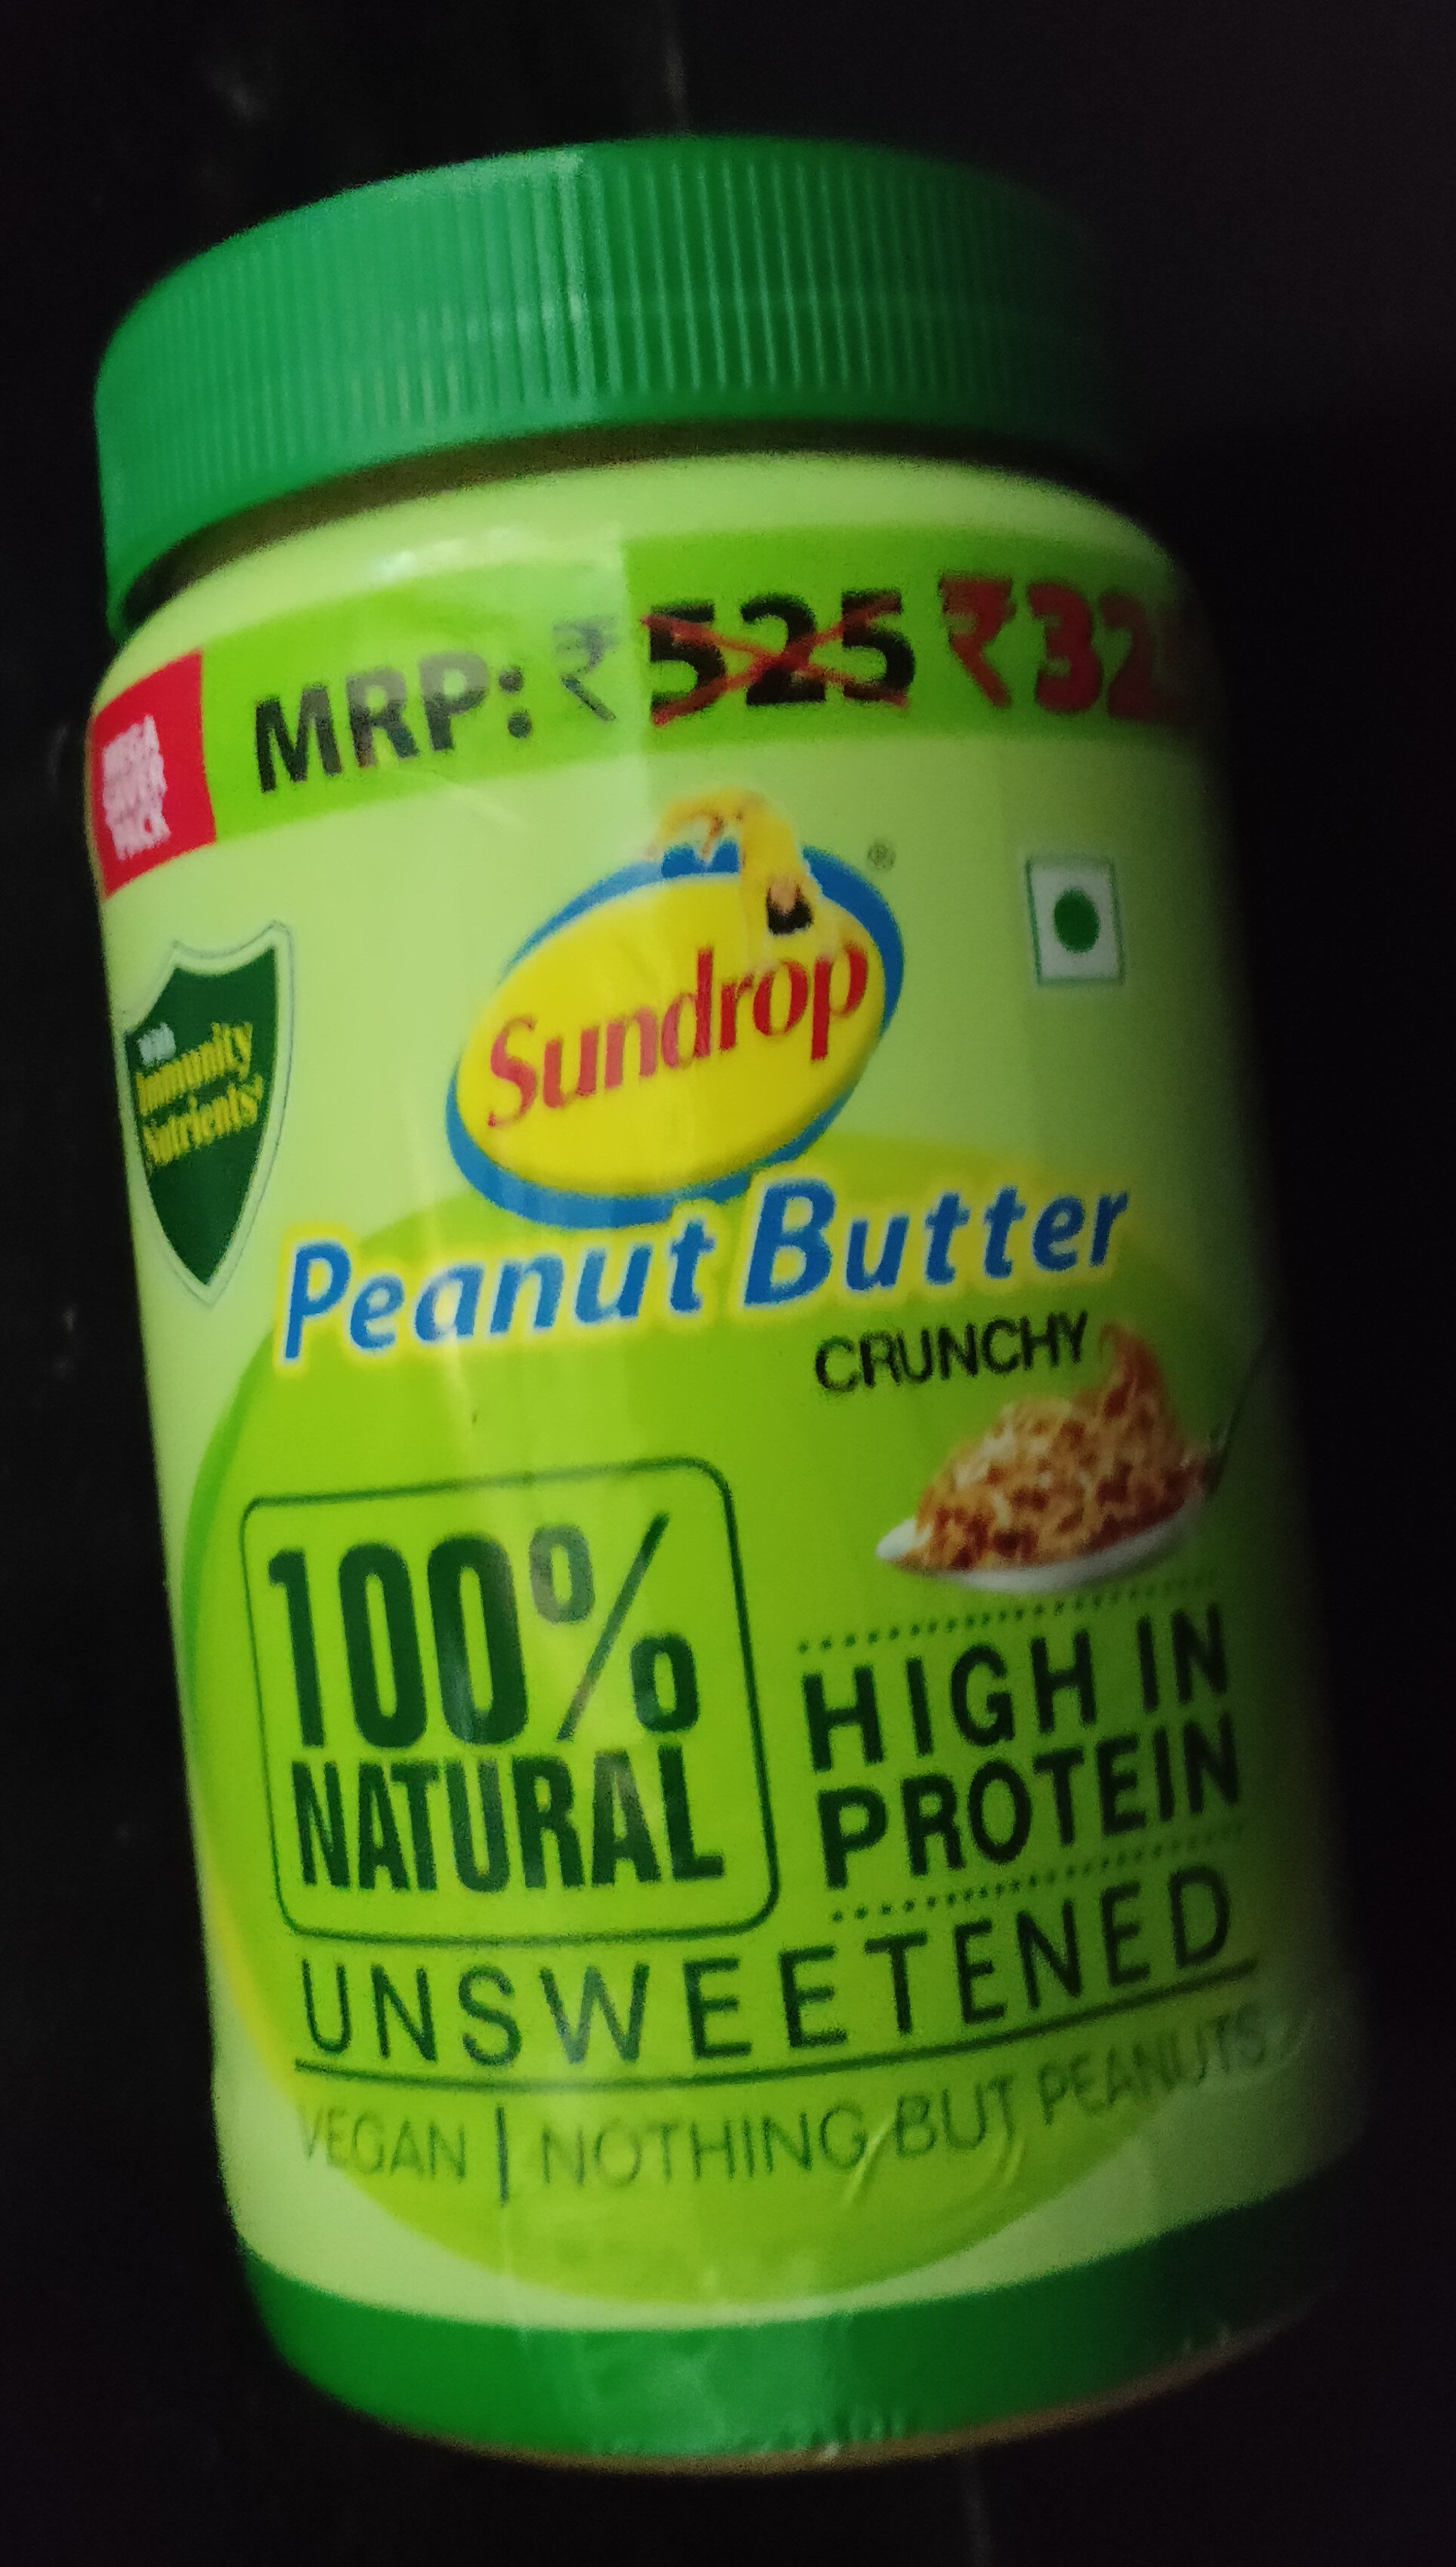 Peanut Butter 100% Natural Crunchy - Product